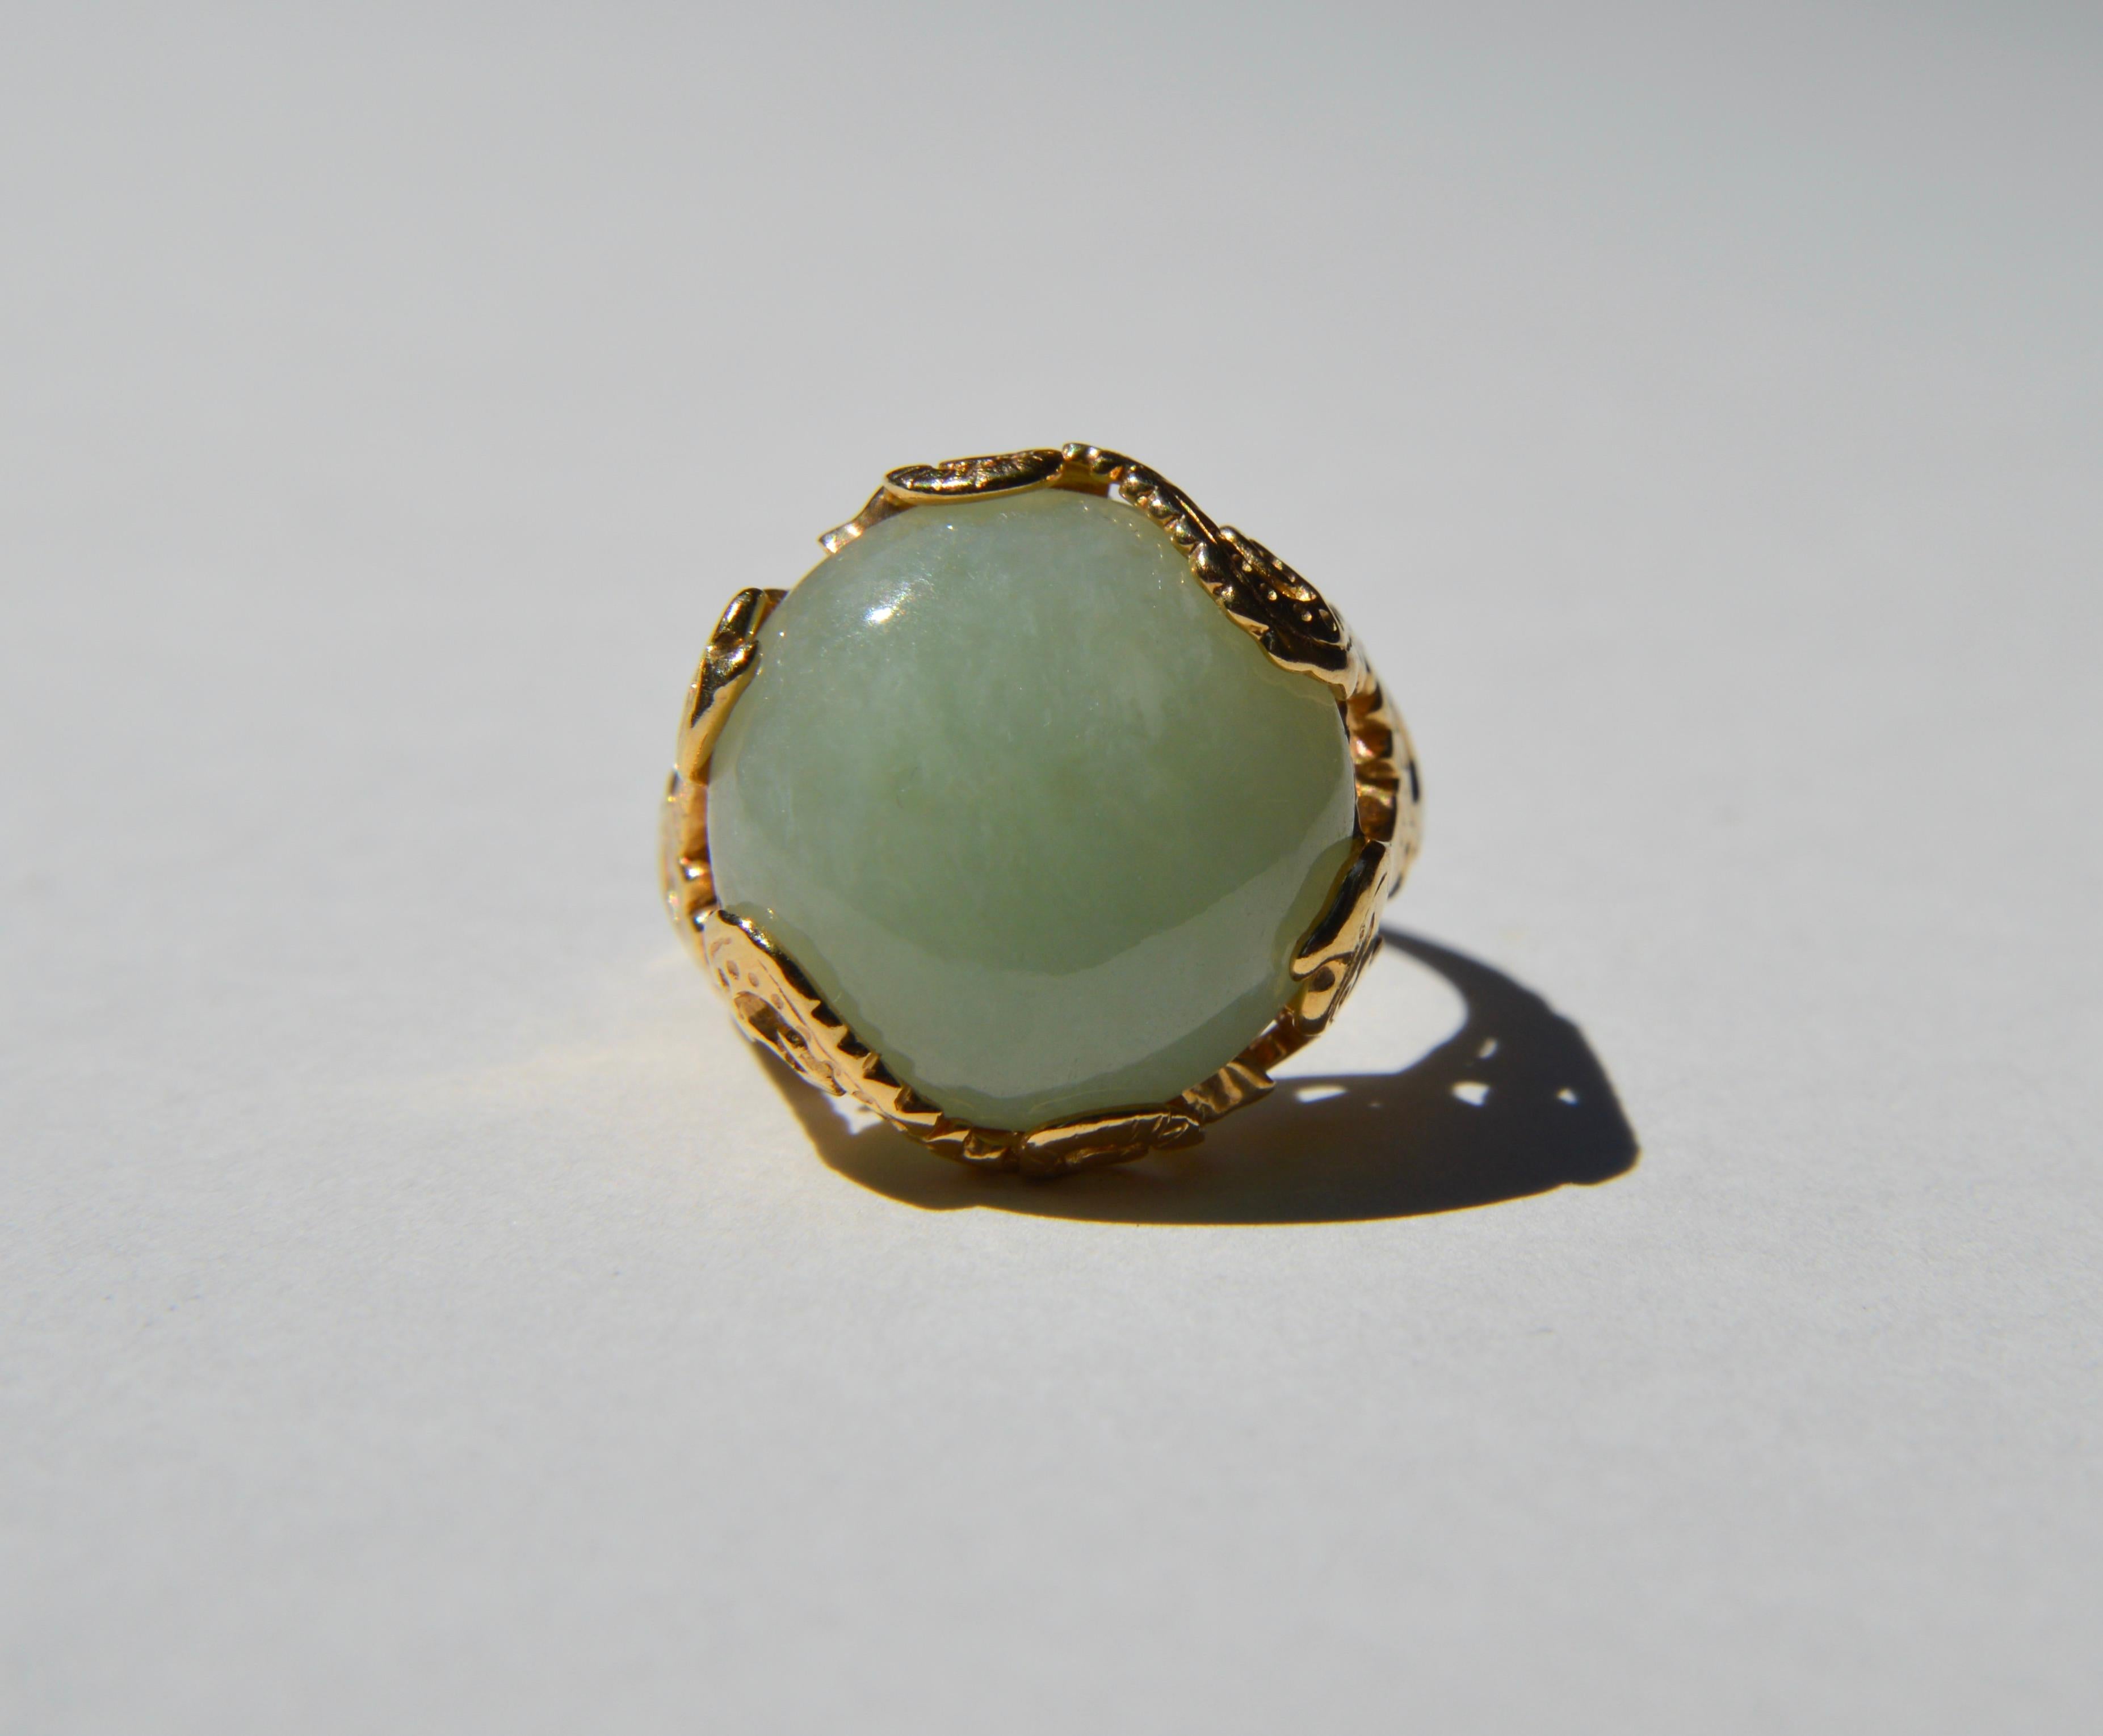 Stunning vintage c1970s 14K yellow gold natural jade jadeite cabochon dragon ring. Size 6.75, can be resized by a jeweler. In excellent pristine condition. Marked as 14K gold. Jade round cabochon measures 15mm in diameter, 12.89 carats. Beautiful